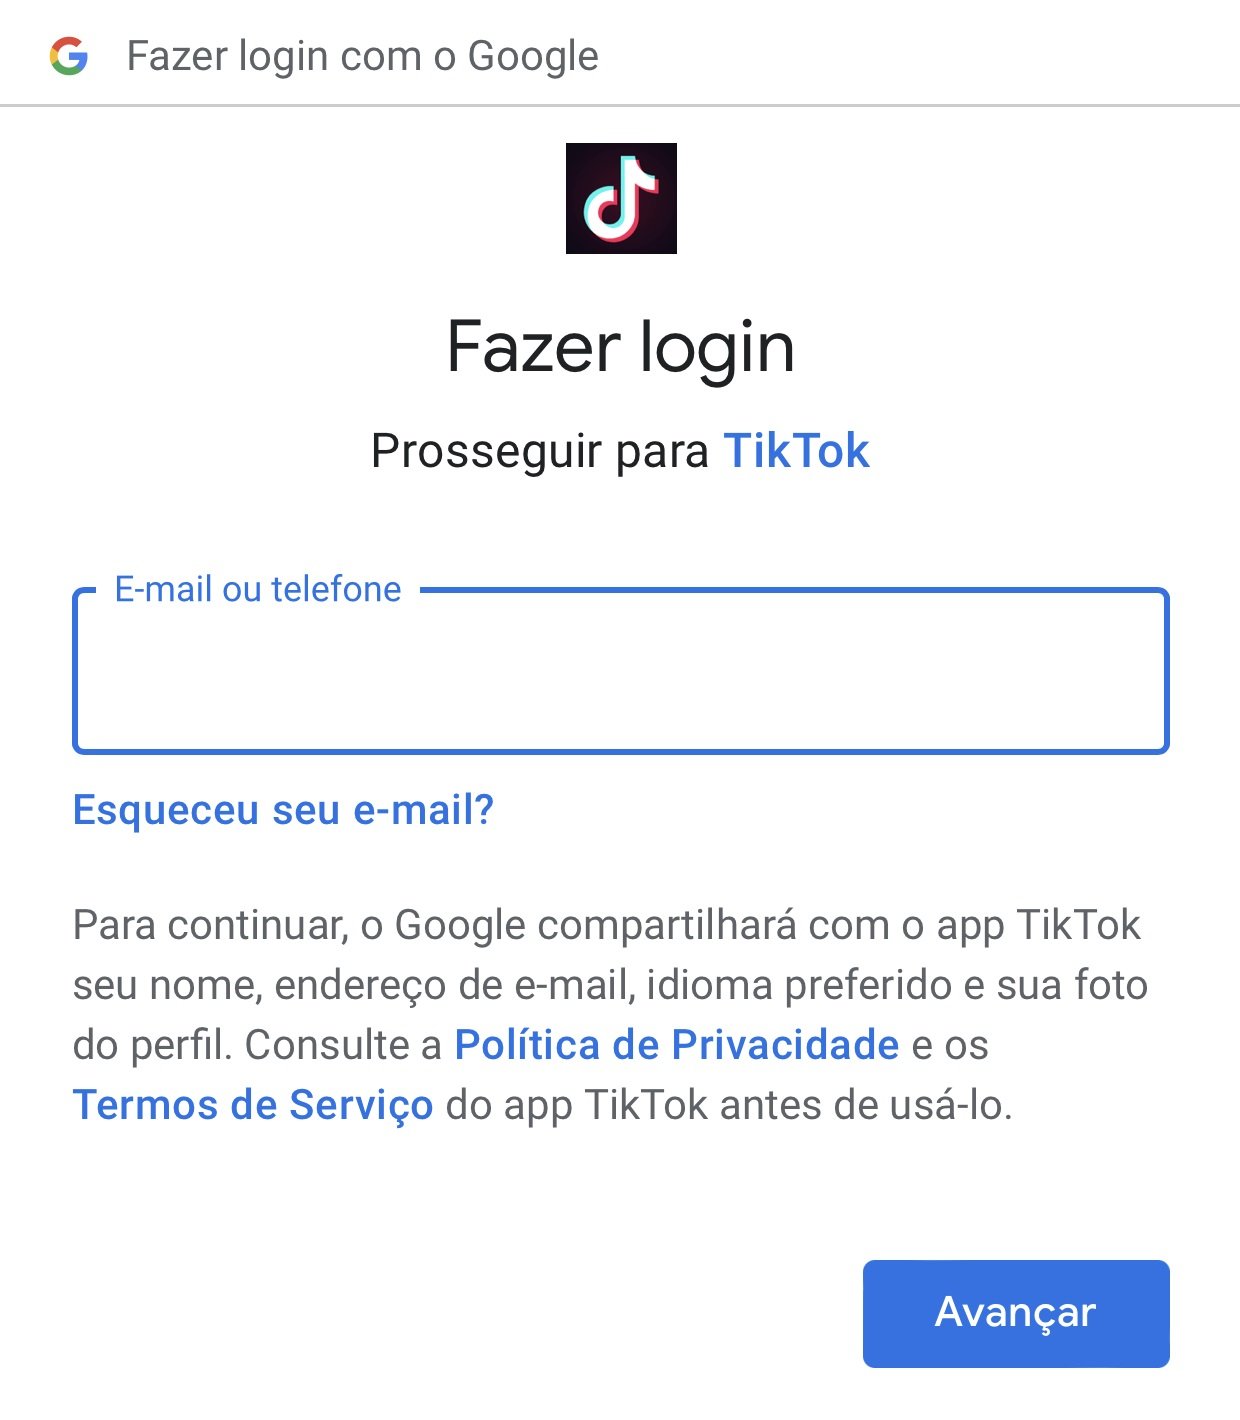 You also need to log in to your Google account to associate it with TikTok.